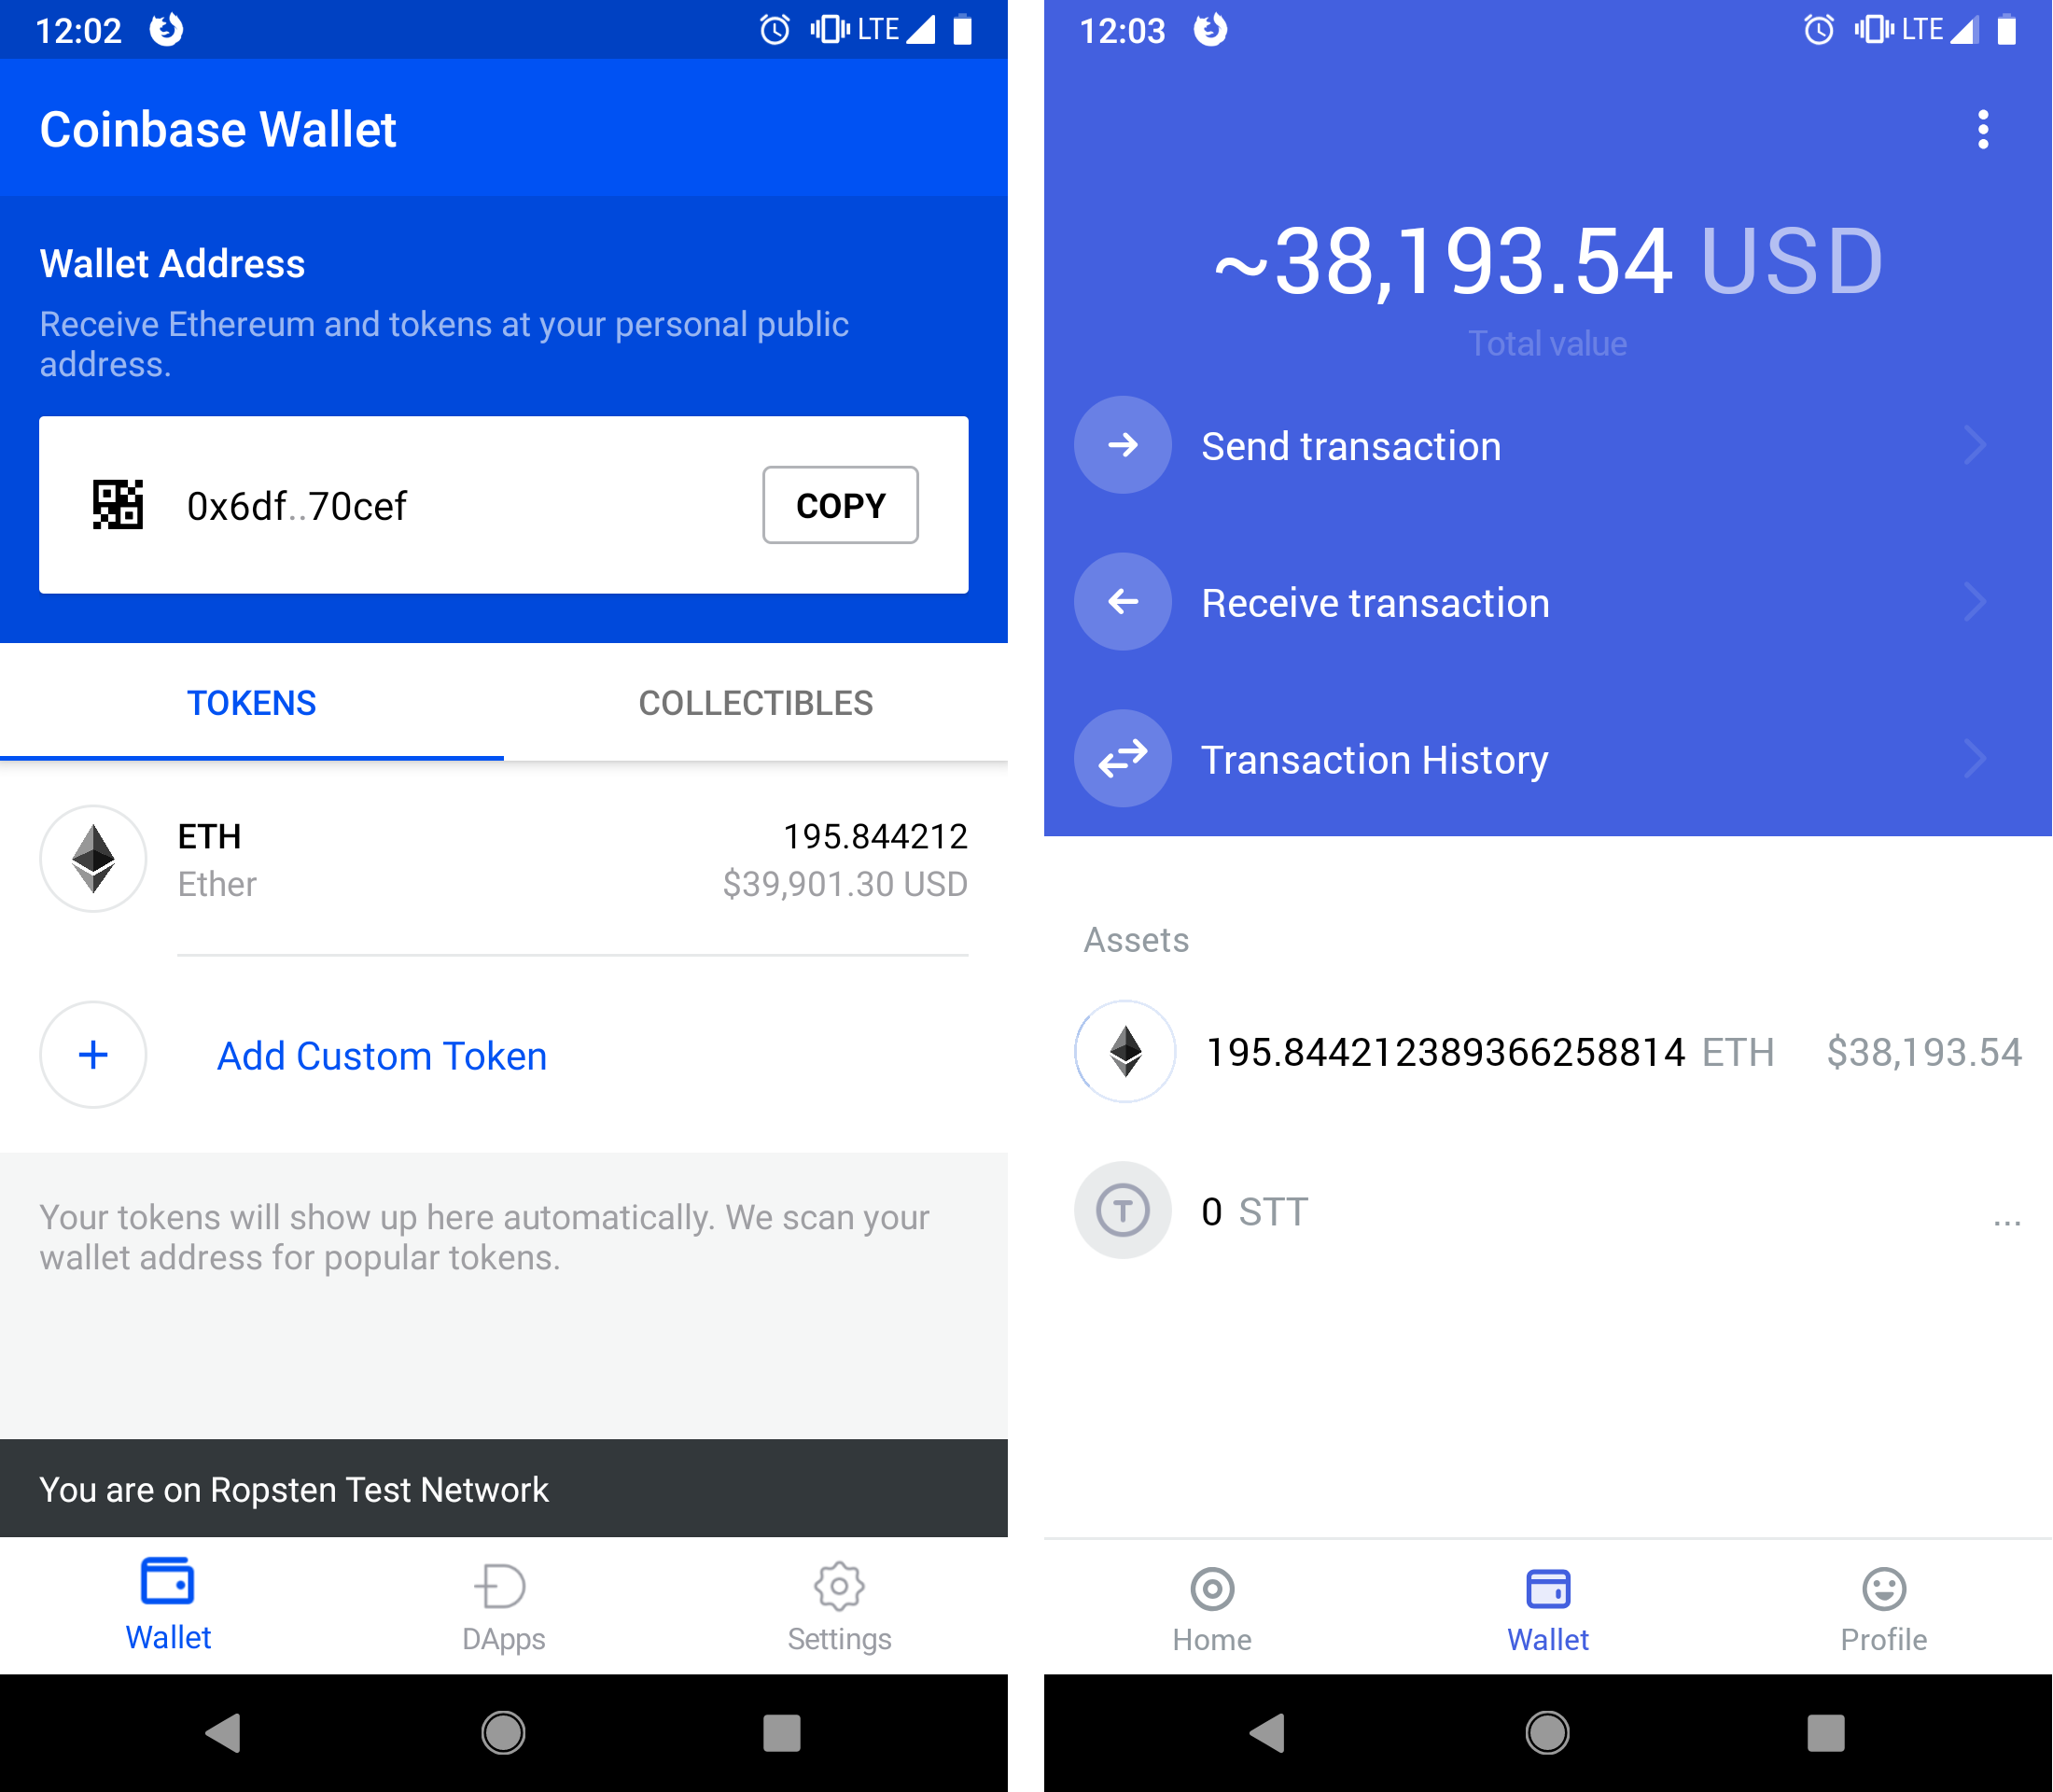 How to buy bitcoin on coinbase with usd wallet